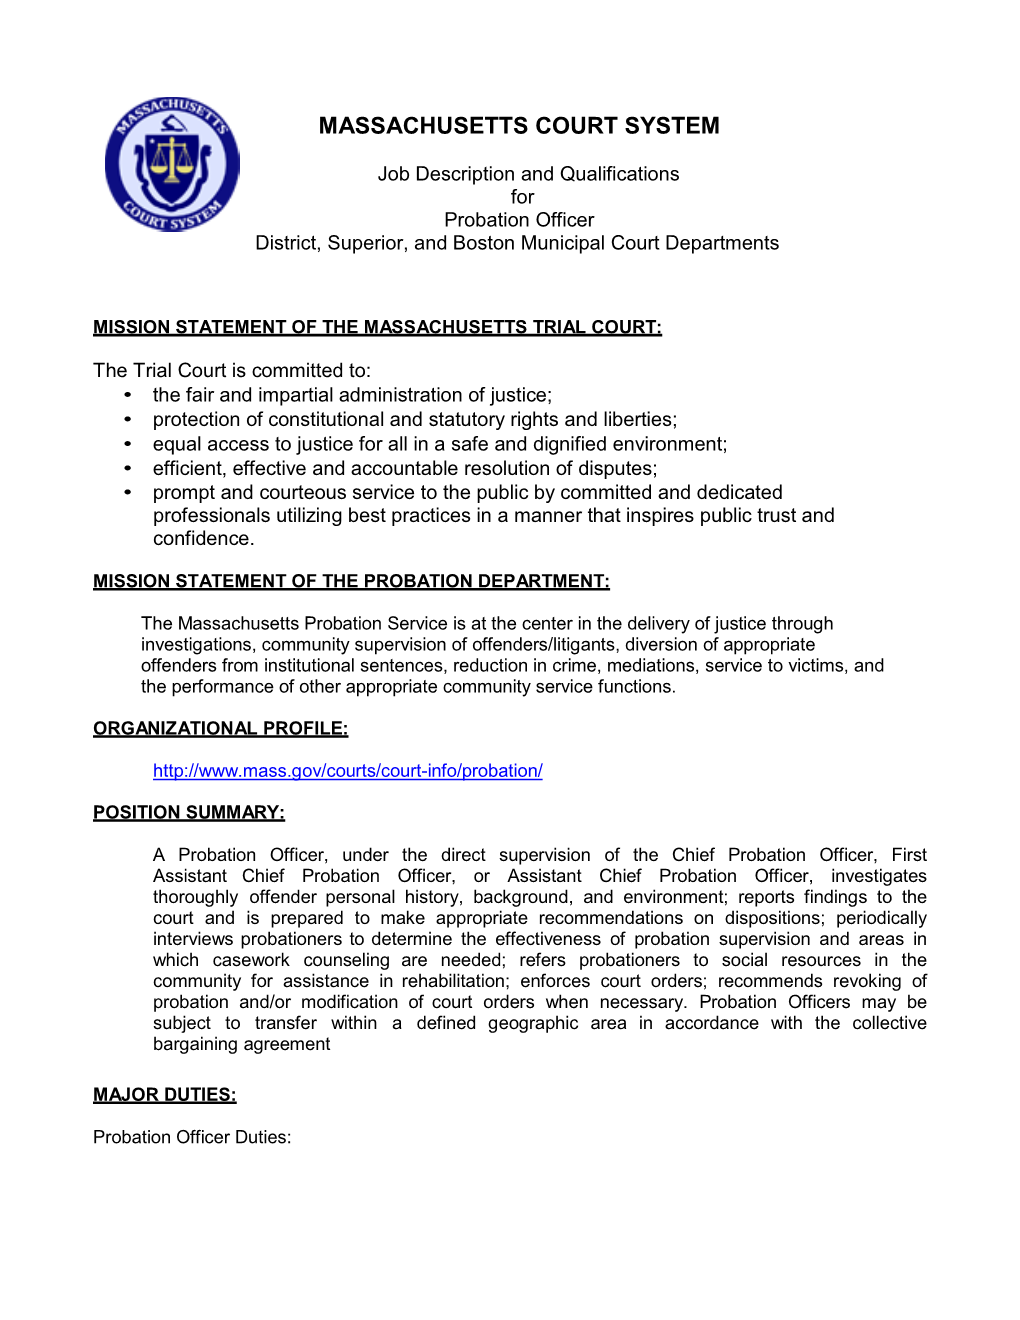 Job Description and Qualifications for Probation Officer District, Superior, and Boston Municipal Court Departments